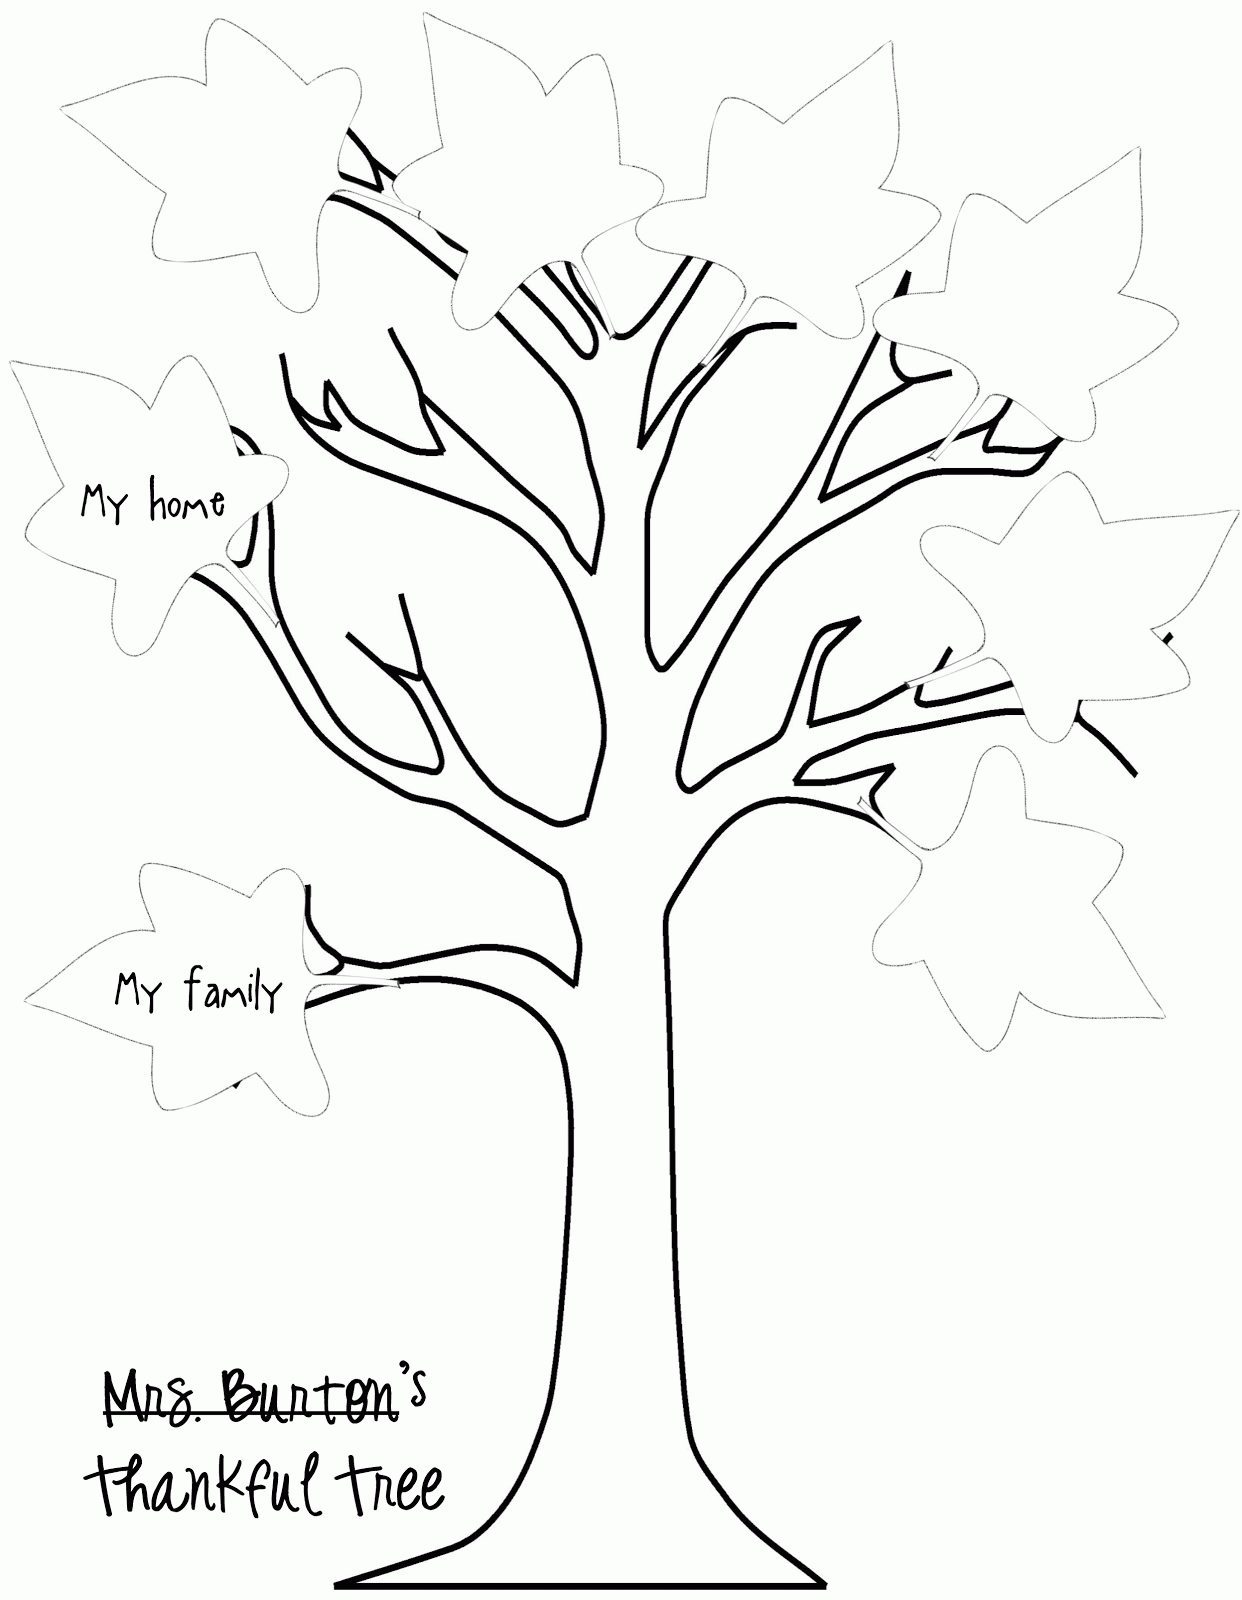 Tree Without Leaves Coloring Page - Coloring Pages for Kids and ...